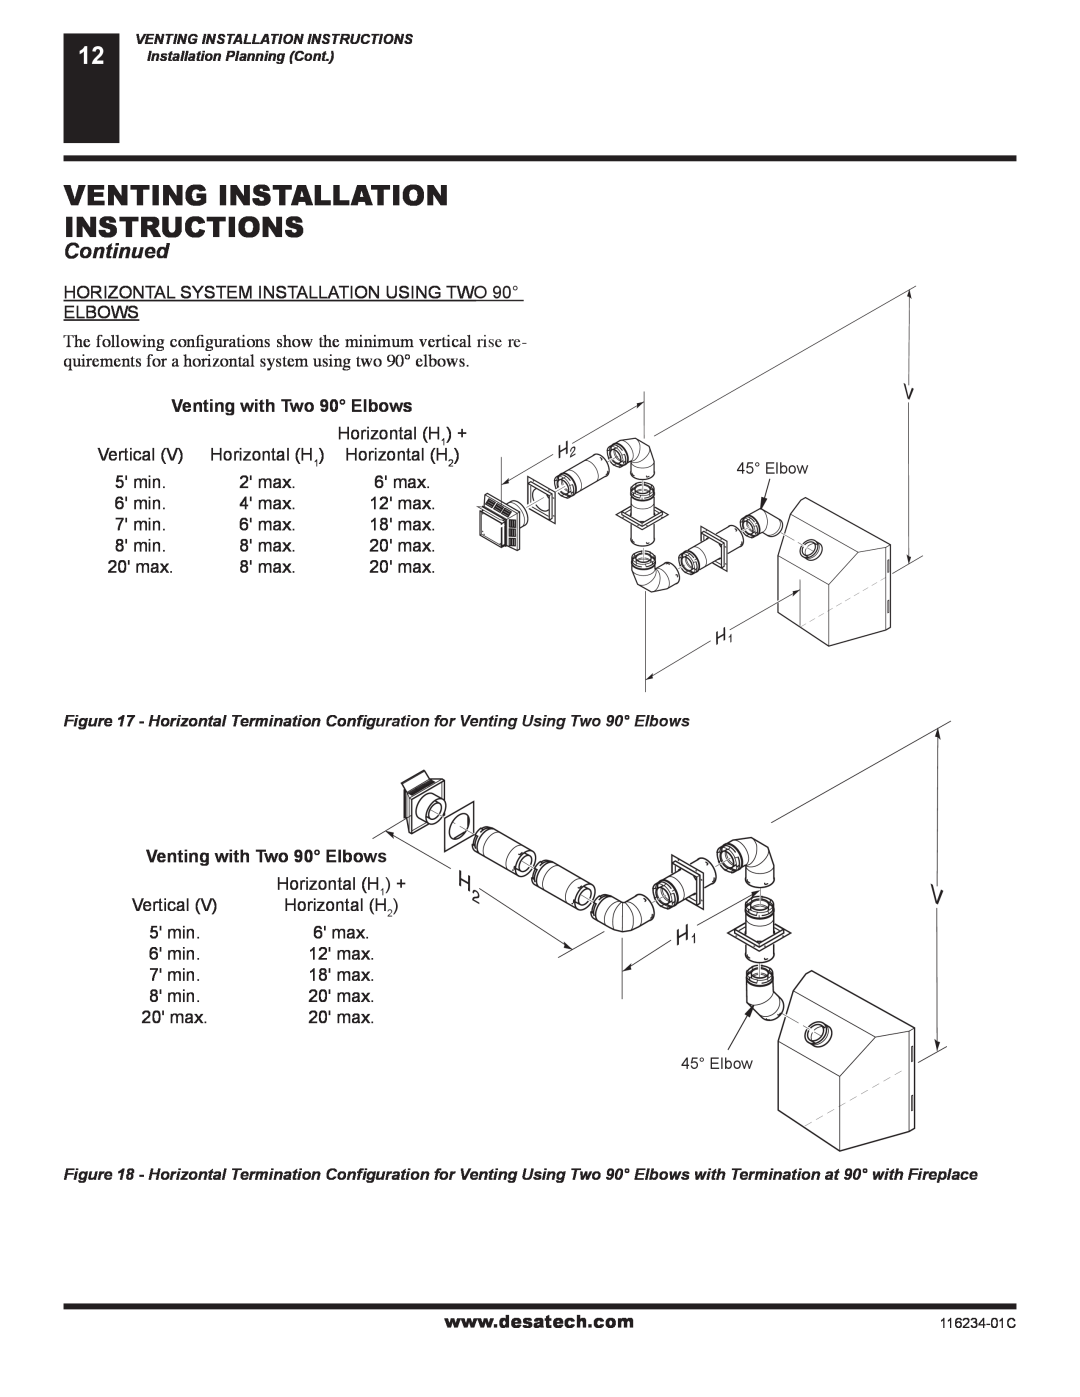 Desa (V)TC36PE SERIES, (V)TC36NE SERIES Venting Installation Instructions, Continued, Venting with Two 90 Elbows 